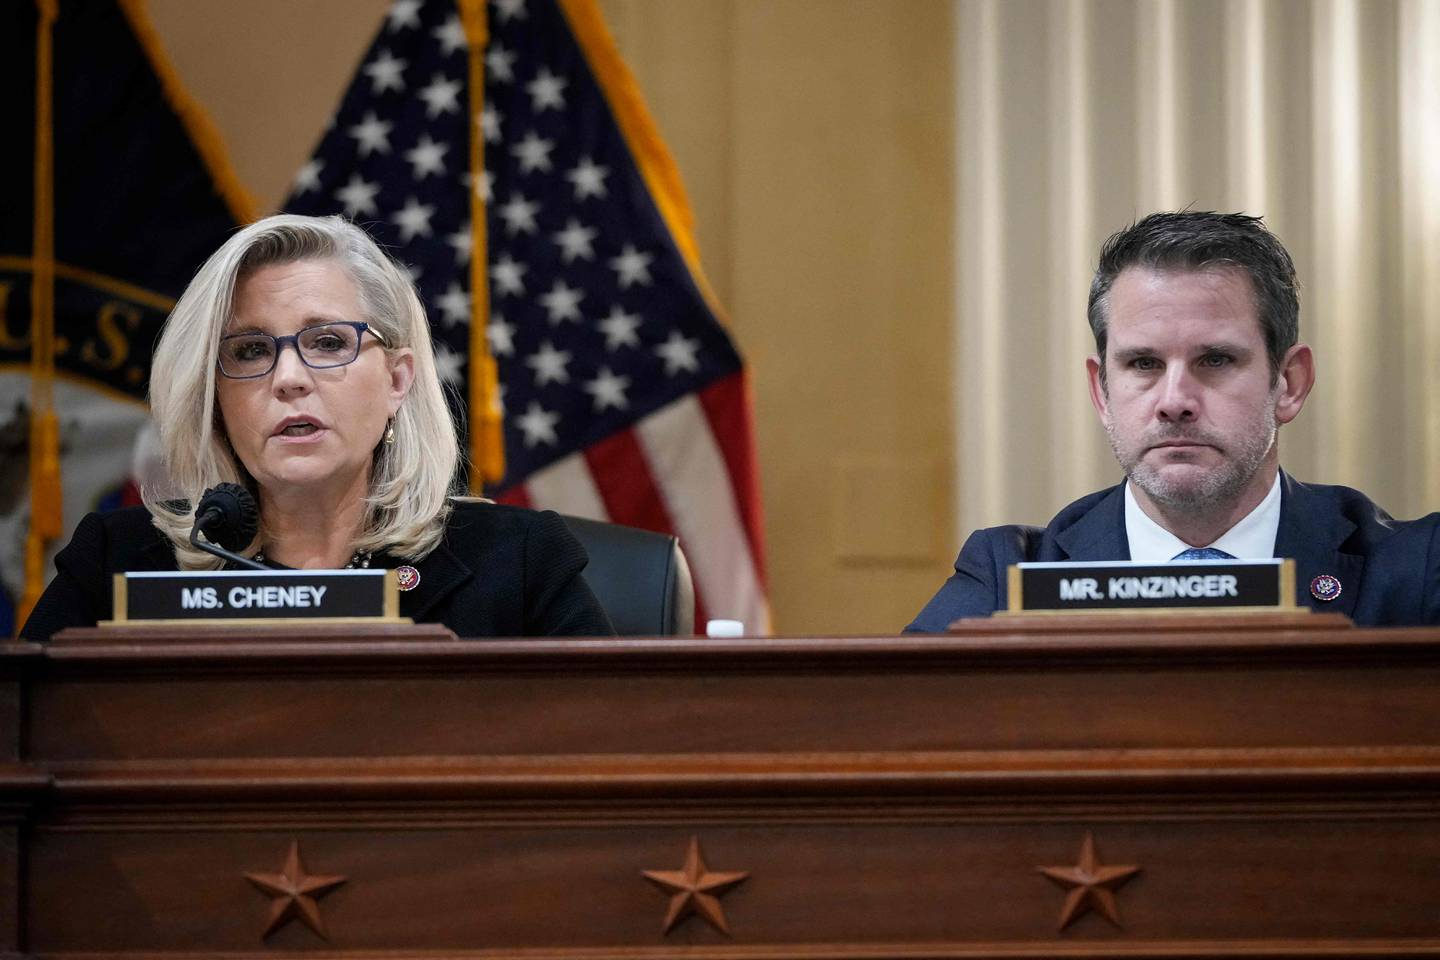 (FILES) In this file photo taken on December 1, 2021, US Republican Representatives Liz Cheney (L) and Adam Kinzinger listen during a select committee investigating the attack on the US Capitol, on December 1, 2021 in Washington, DC. - Republicans were set to censure Cheney and Kinzinge on February 4, 2022, in a significant escalation of the drive to oust dissidents seen as disloyal to former US President Donald Trump. Cheney and Kinzinger, the lone Republicans on the House committee investigating Trump's role in the January 6, 2021, US Capitol assault, are regarded as adversaries of the ex-president, who retains his iron grip on the party despite losing the 2020 election. (Photo by Drew Angerer / POOL / AFP)